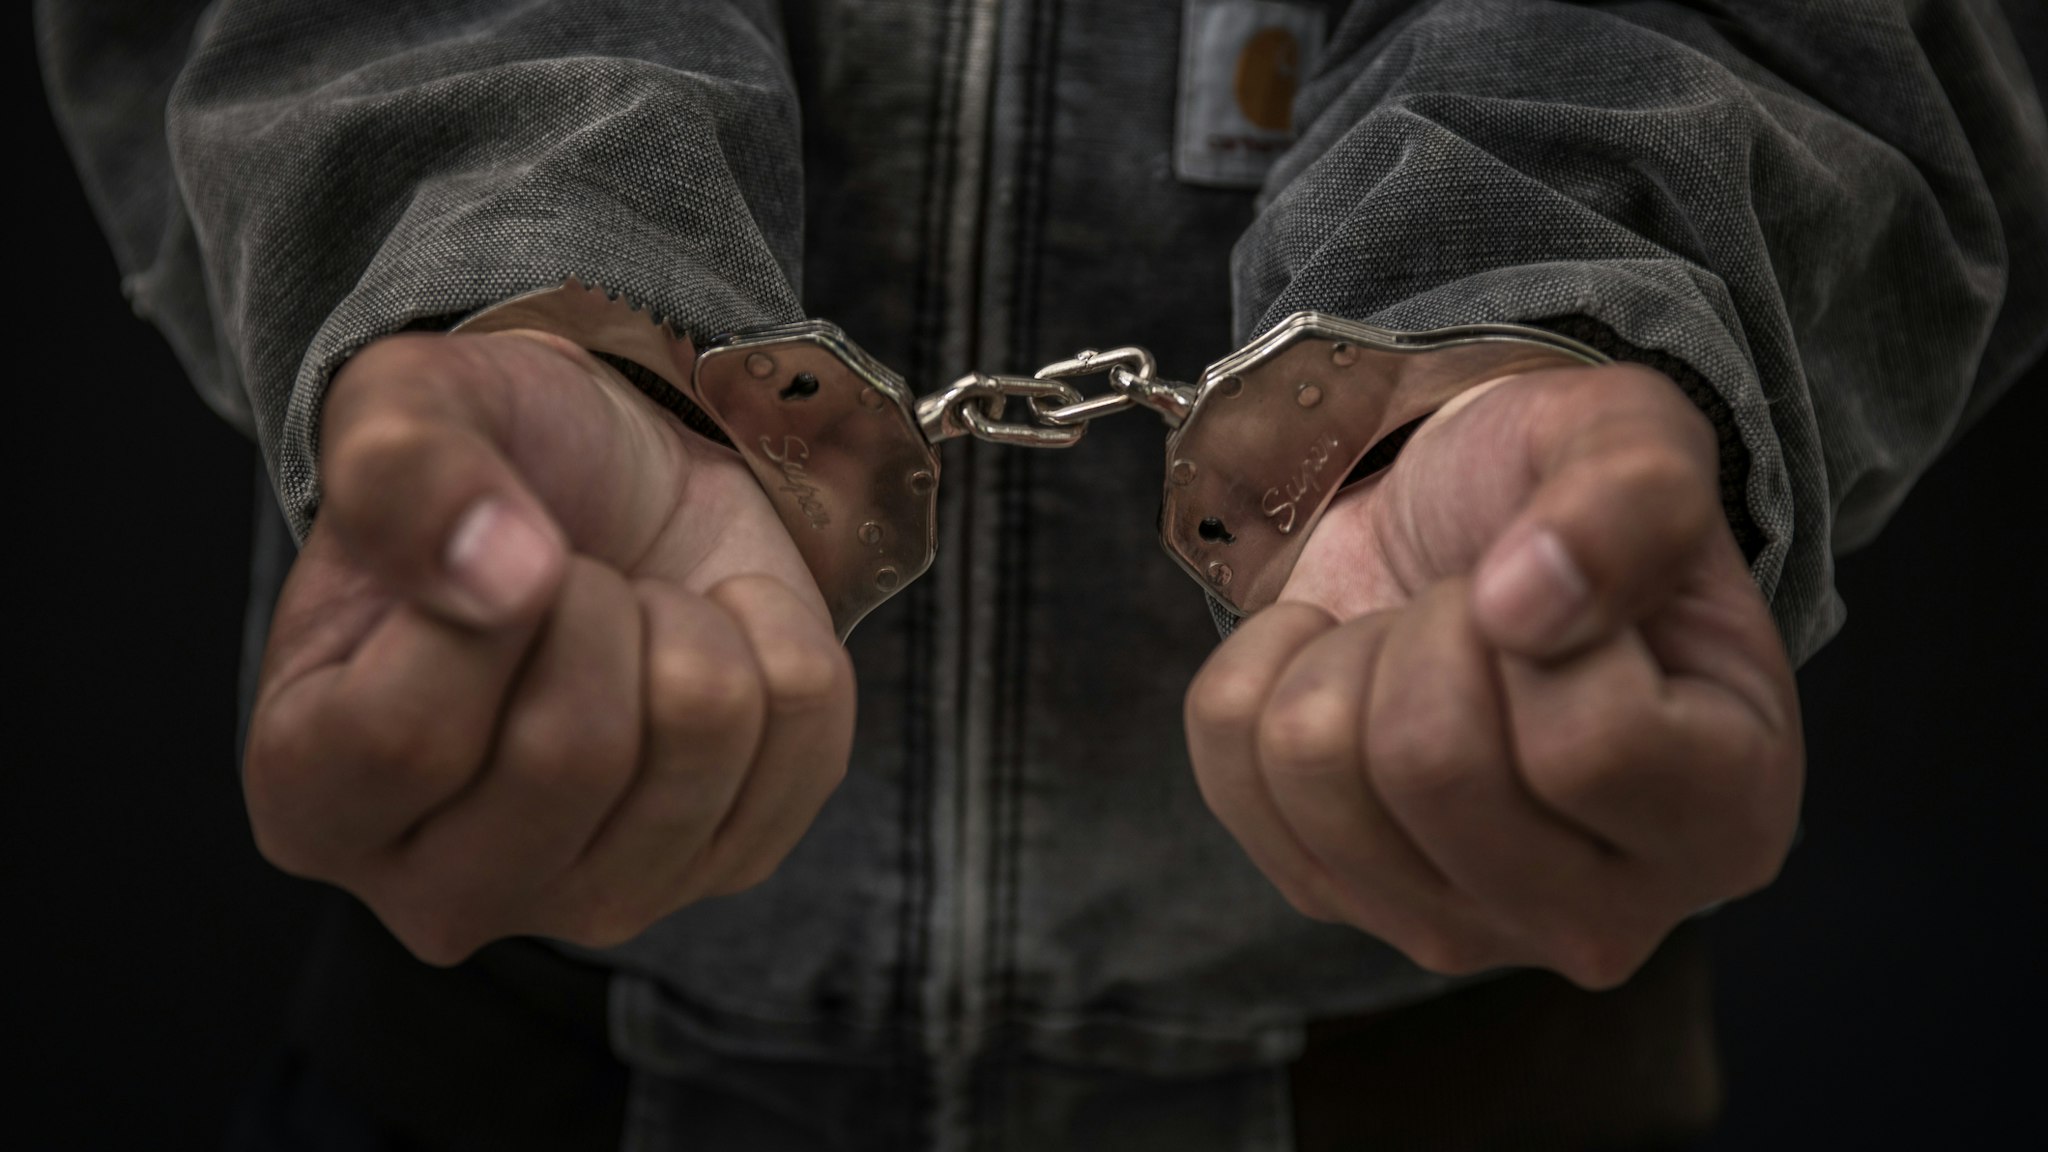 Upset handcuffed man imprisoned for financial crime, punished for serious fraud.